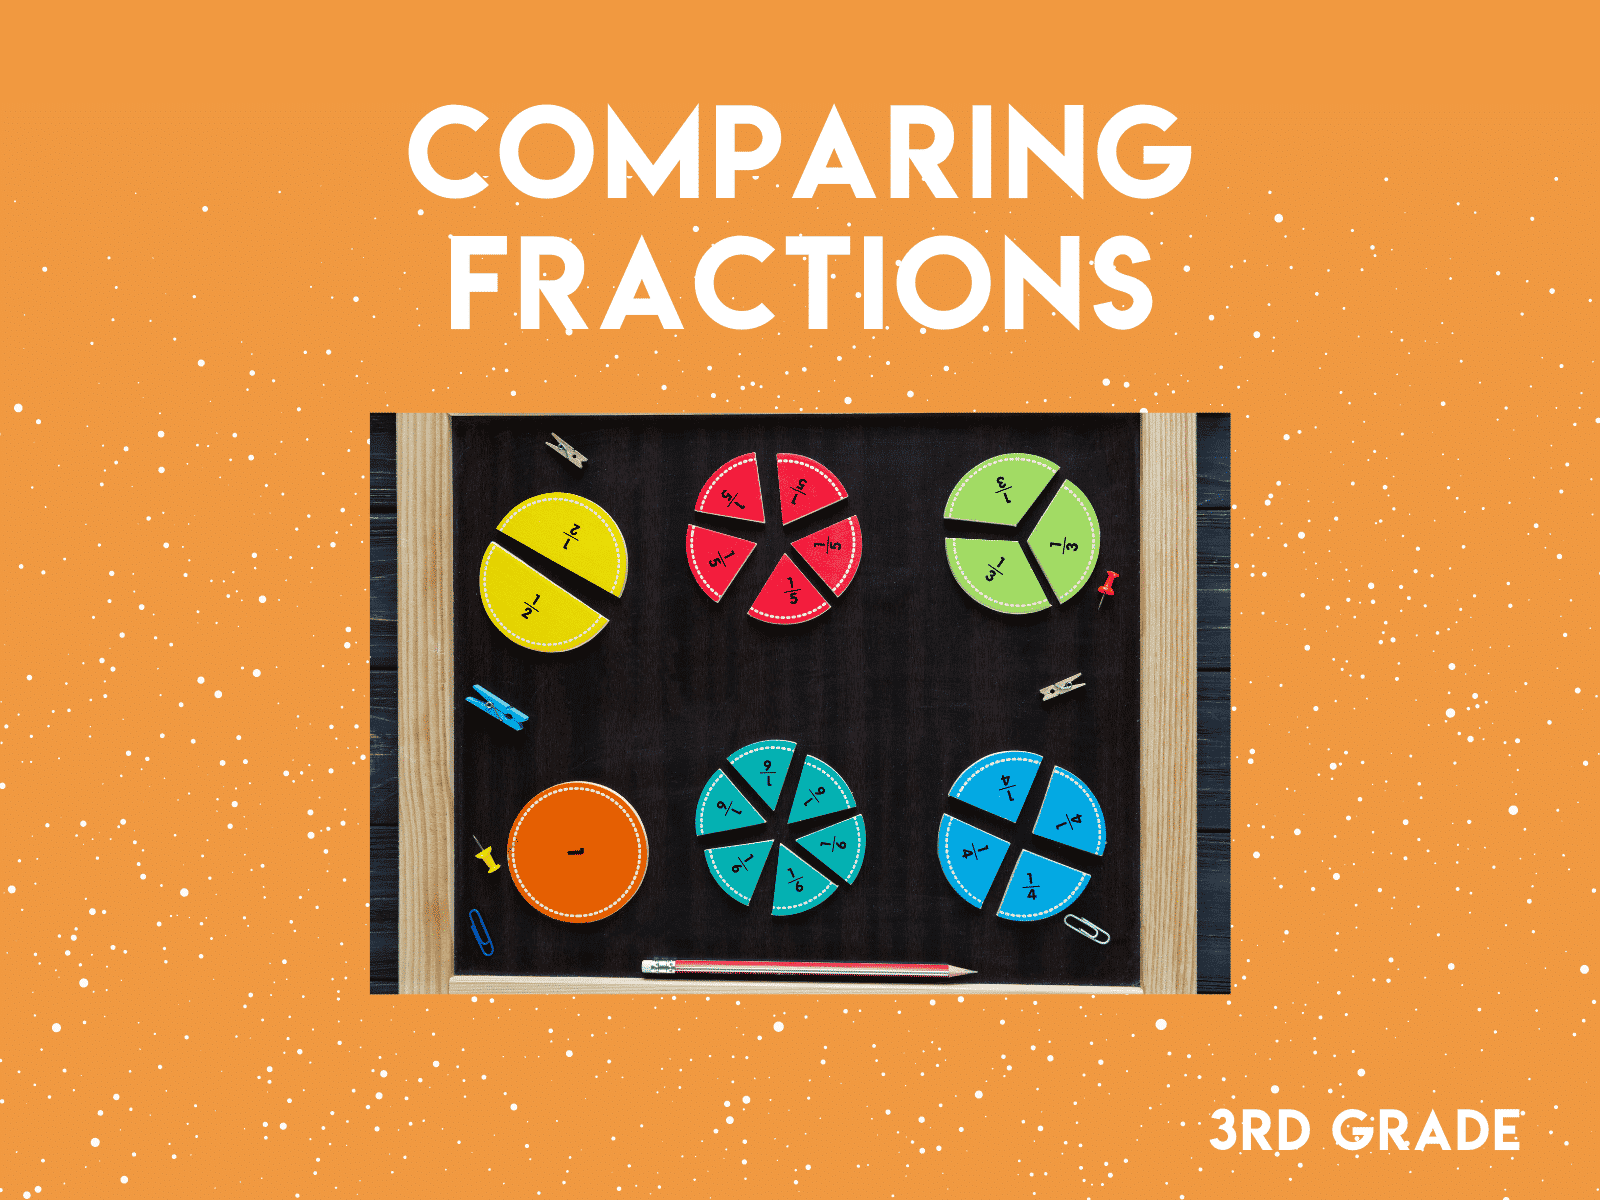 Practice fractions with this free third grade math resource.